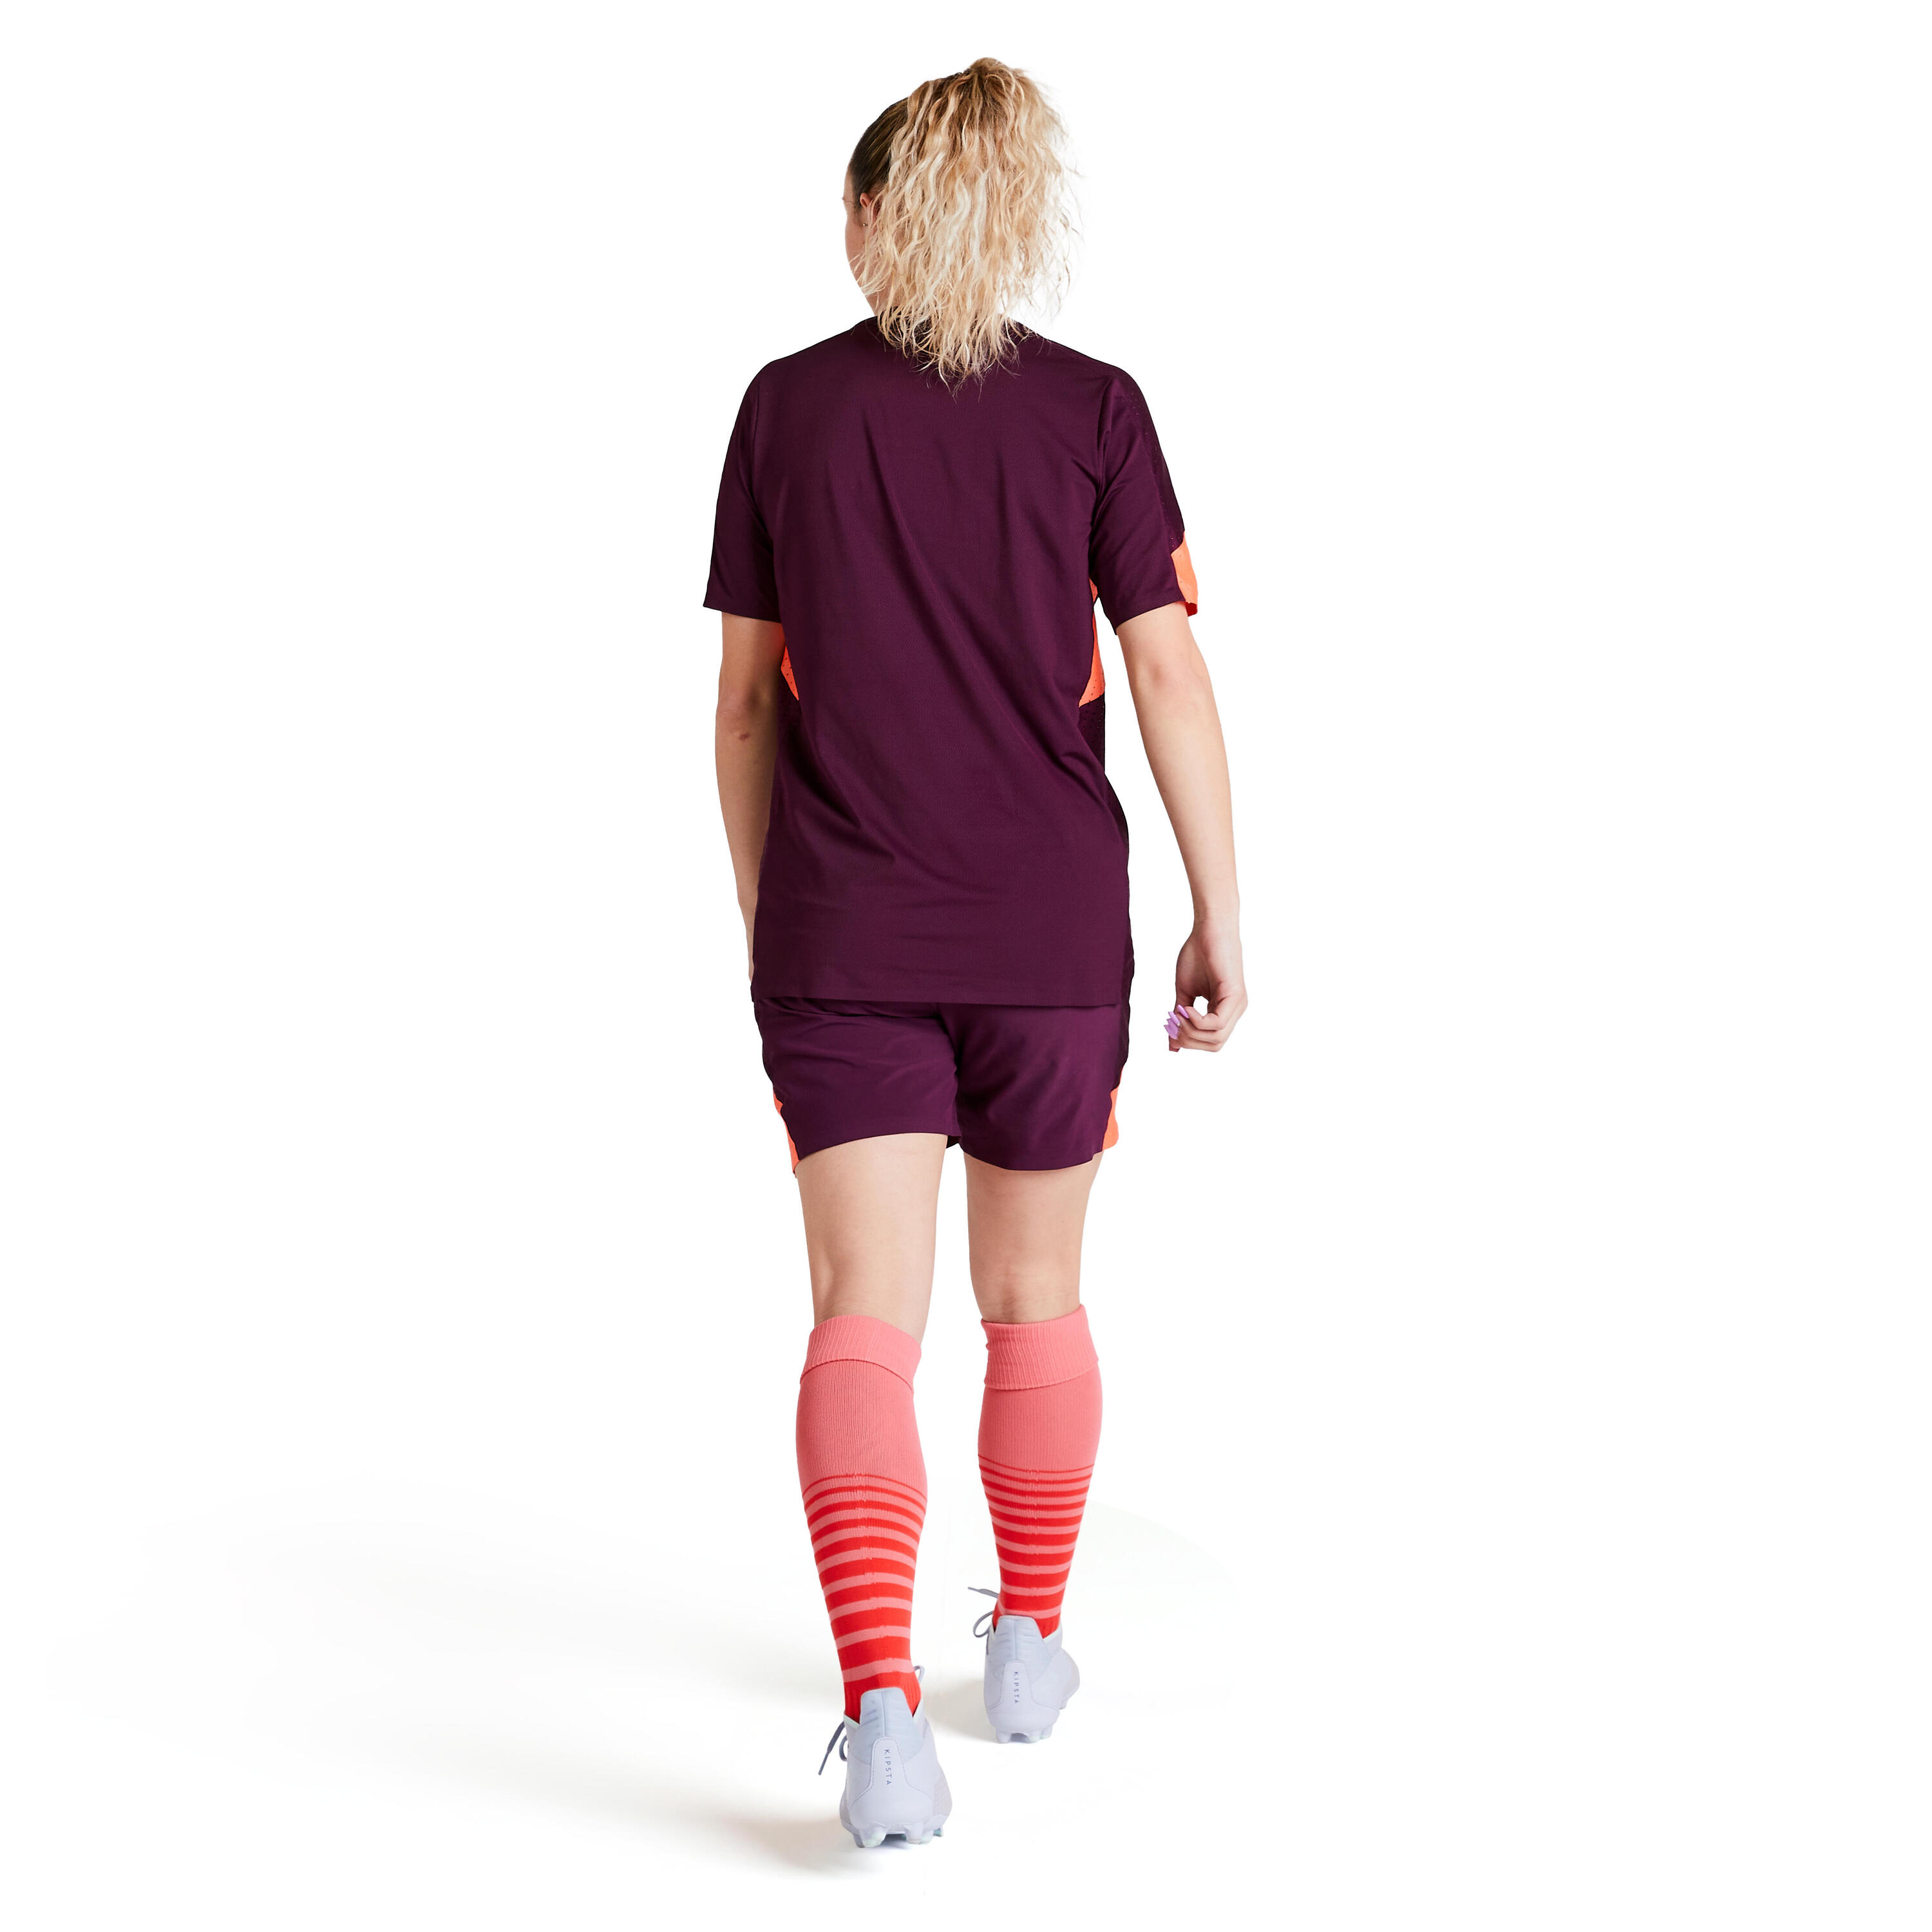 Women's Football Jersey F900 - Coral 8/31